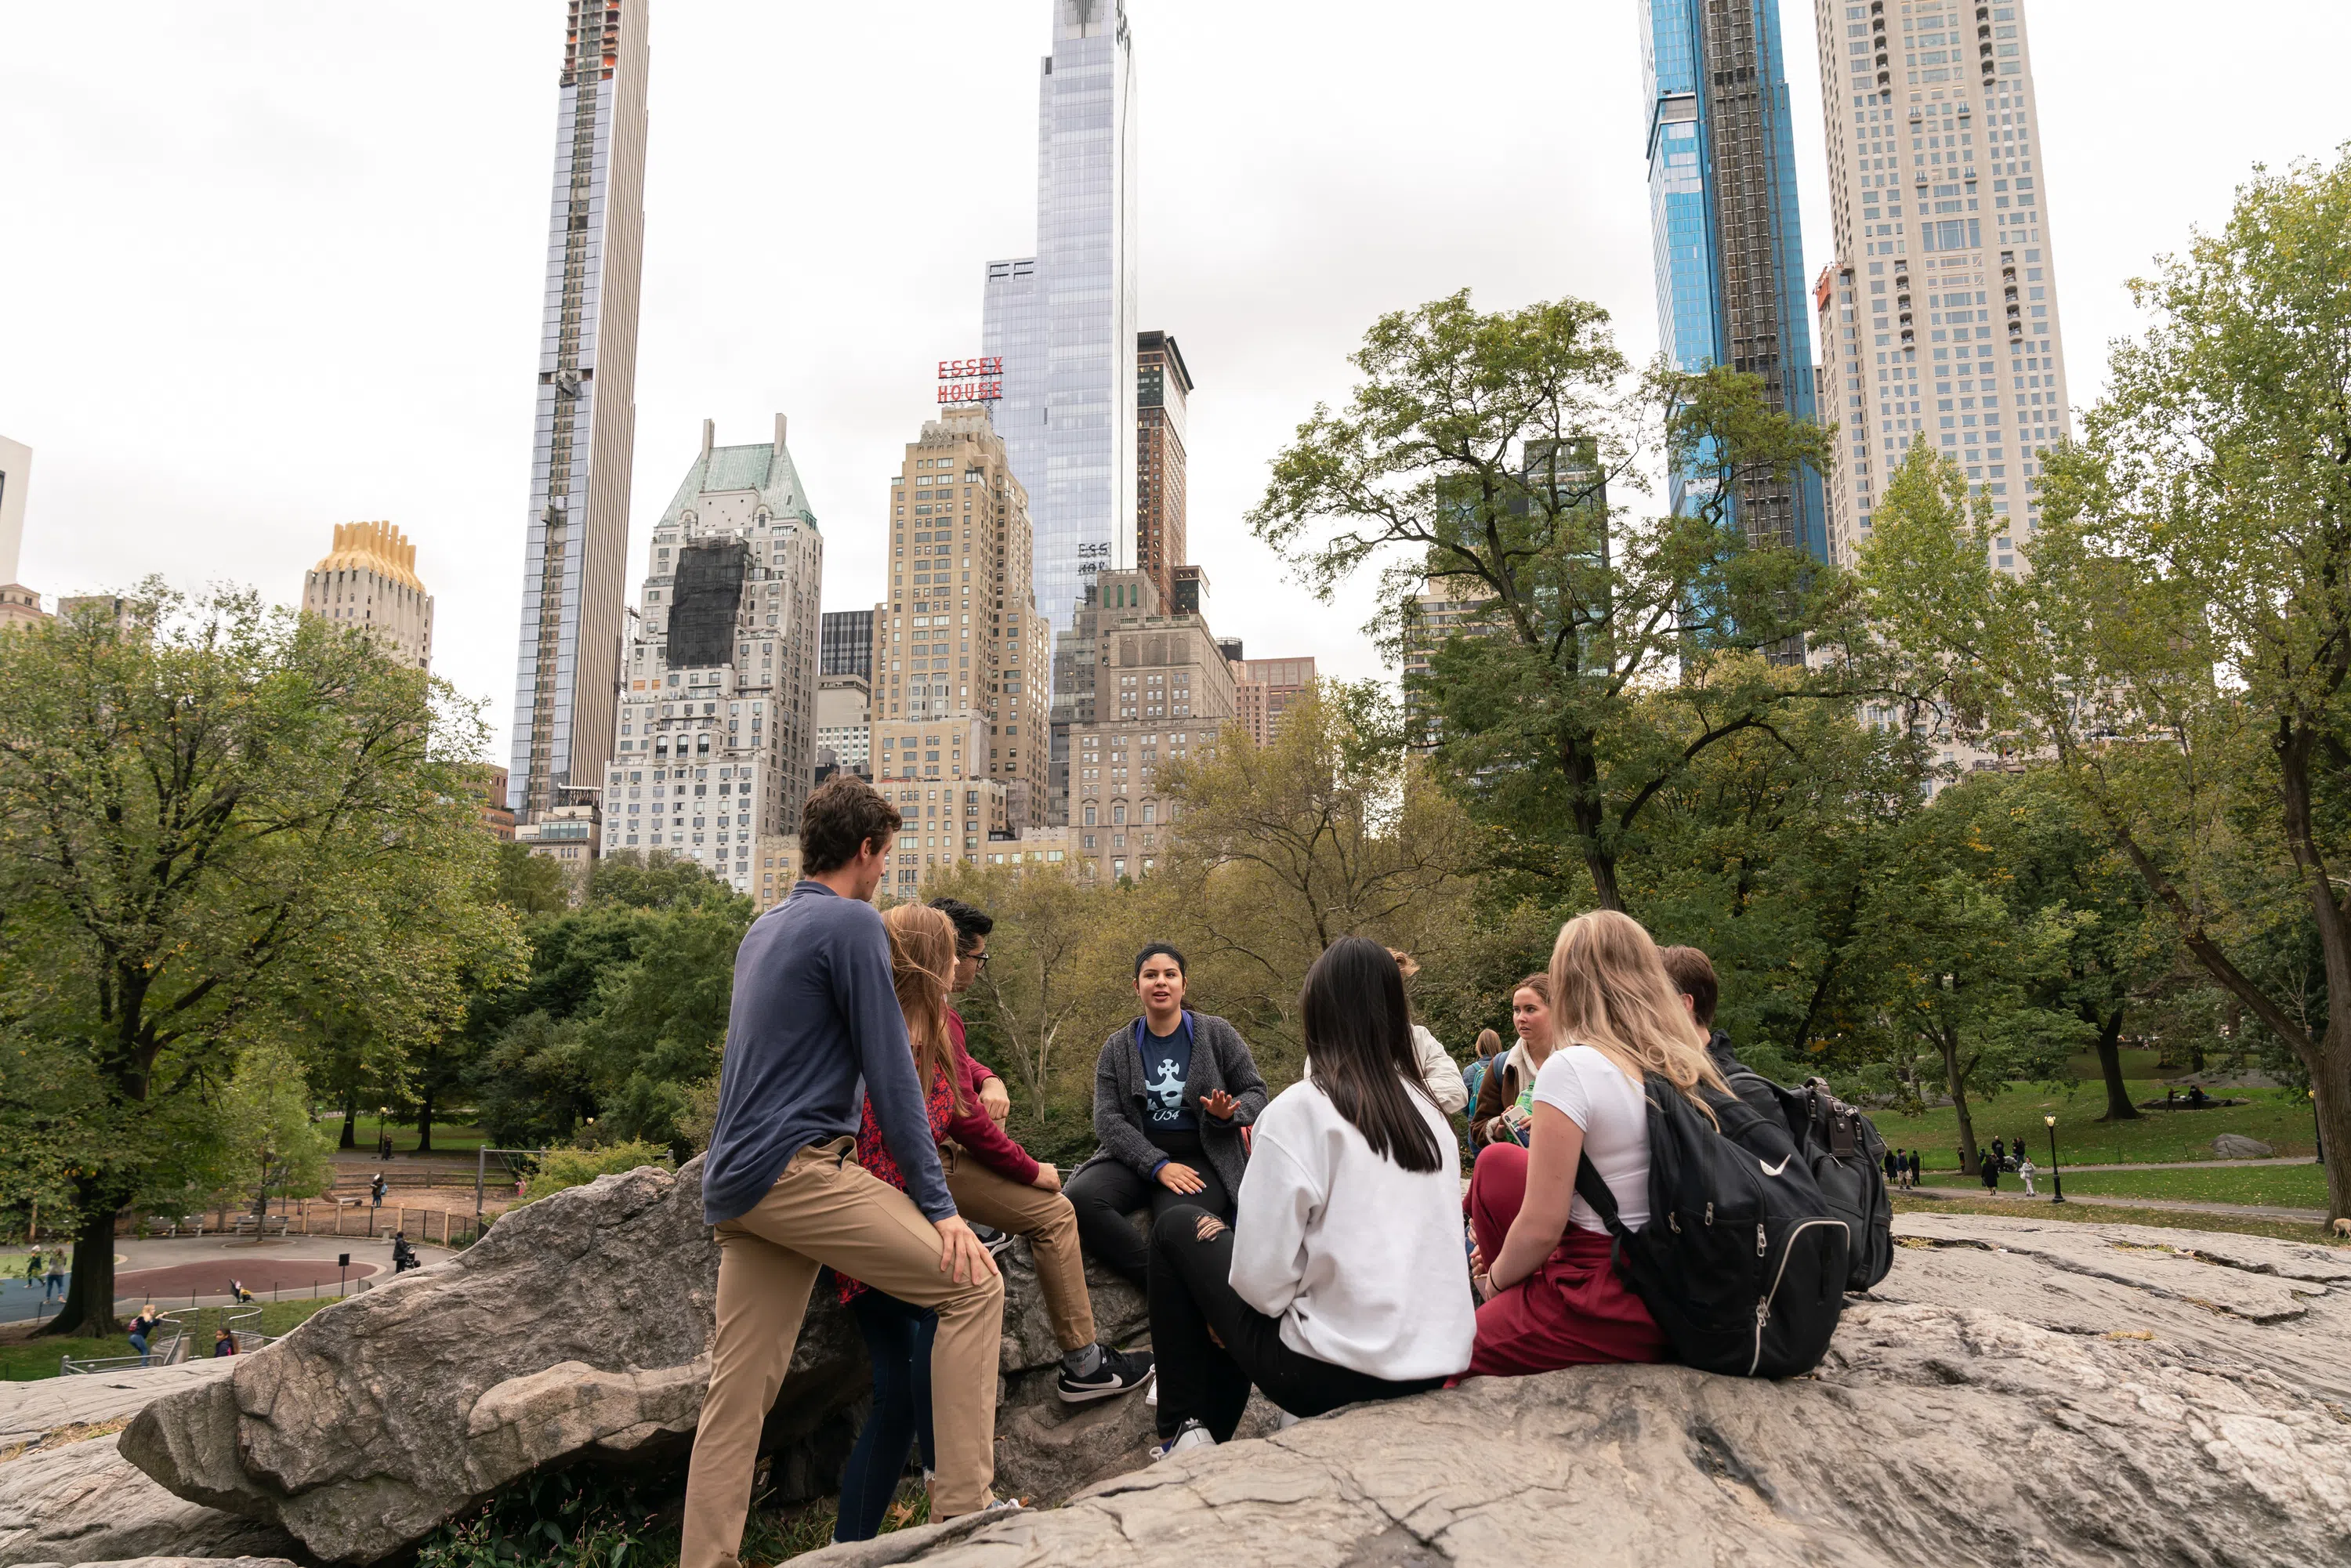 A group of students sit in a circle in Central Park, they are surrounded by greenery, rocks, and trees. There are several tall skyscrapers in the background.